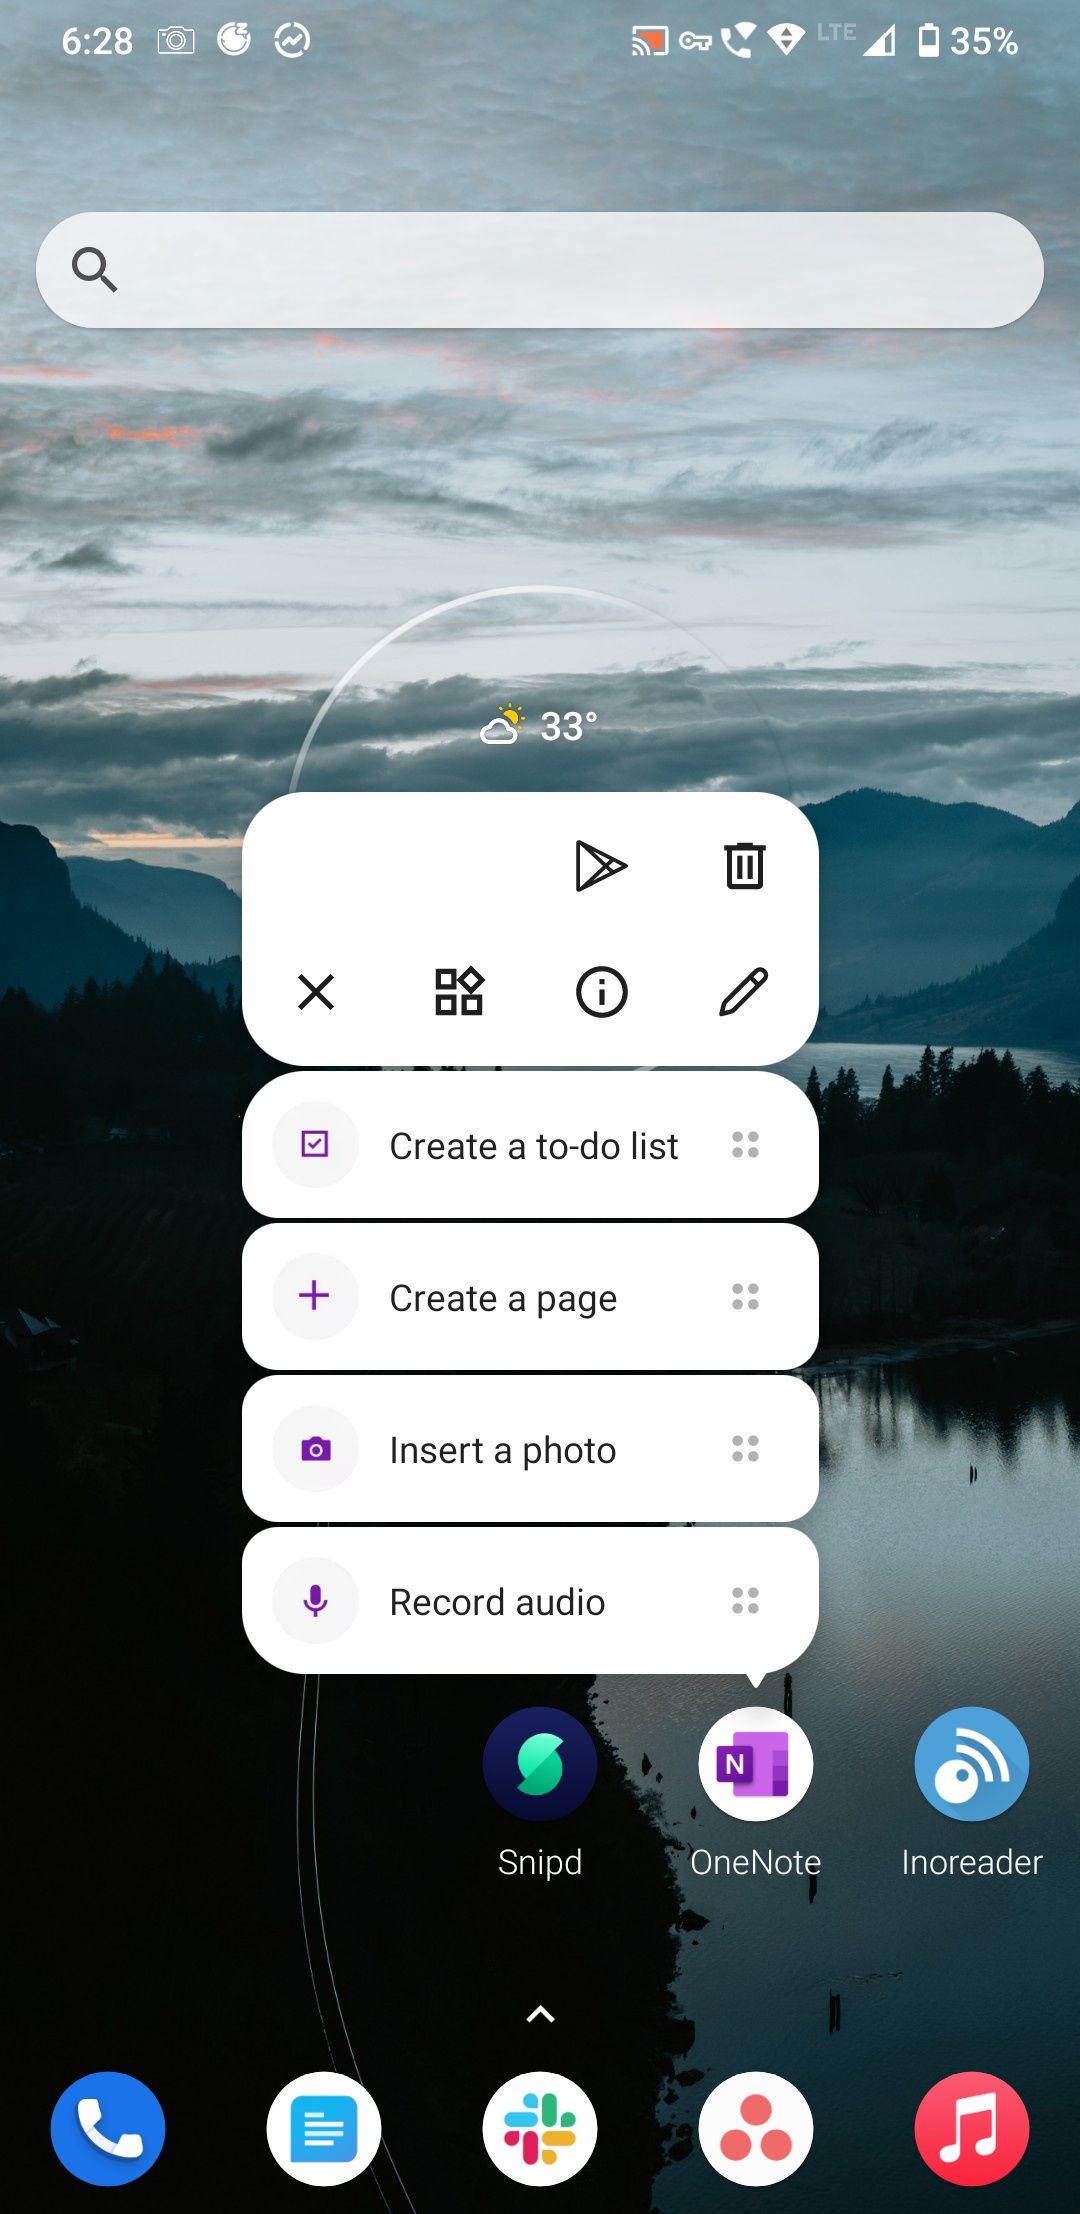 tap the pencil icon to setup quick shortcuts